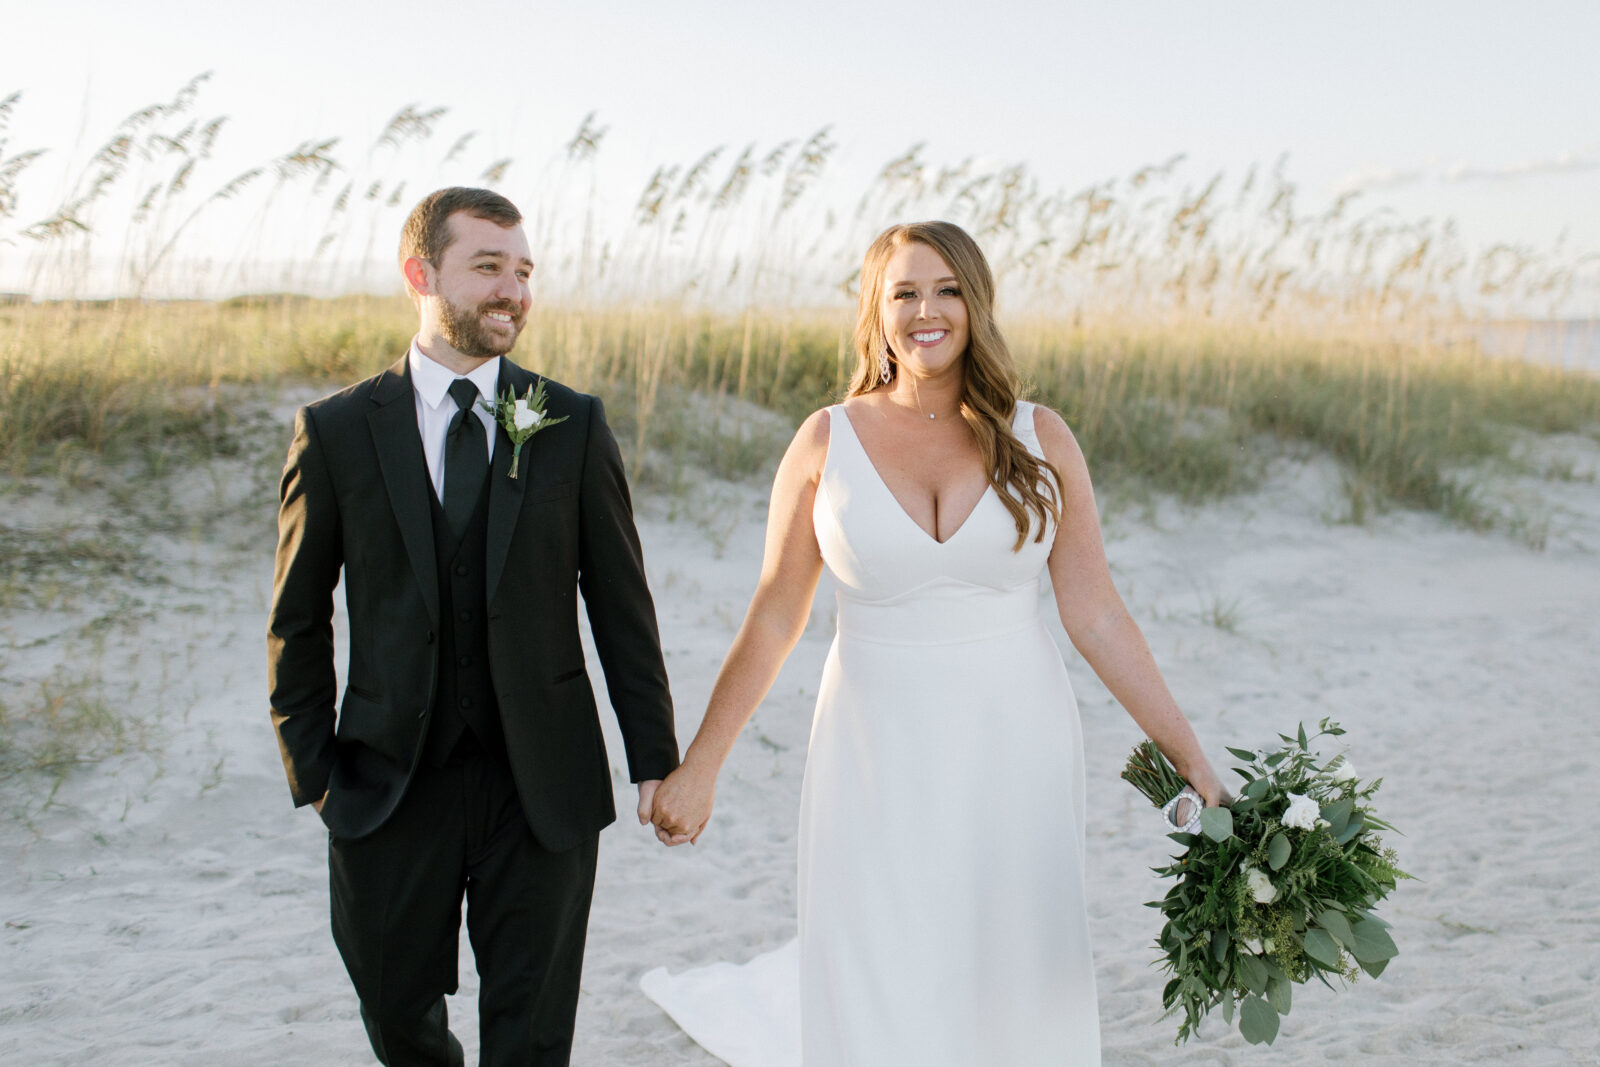 bride and groom walk on beach smiling with dunes in background